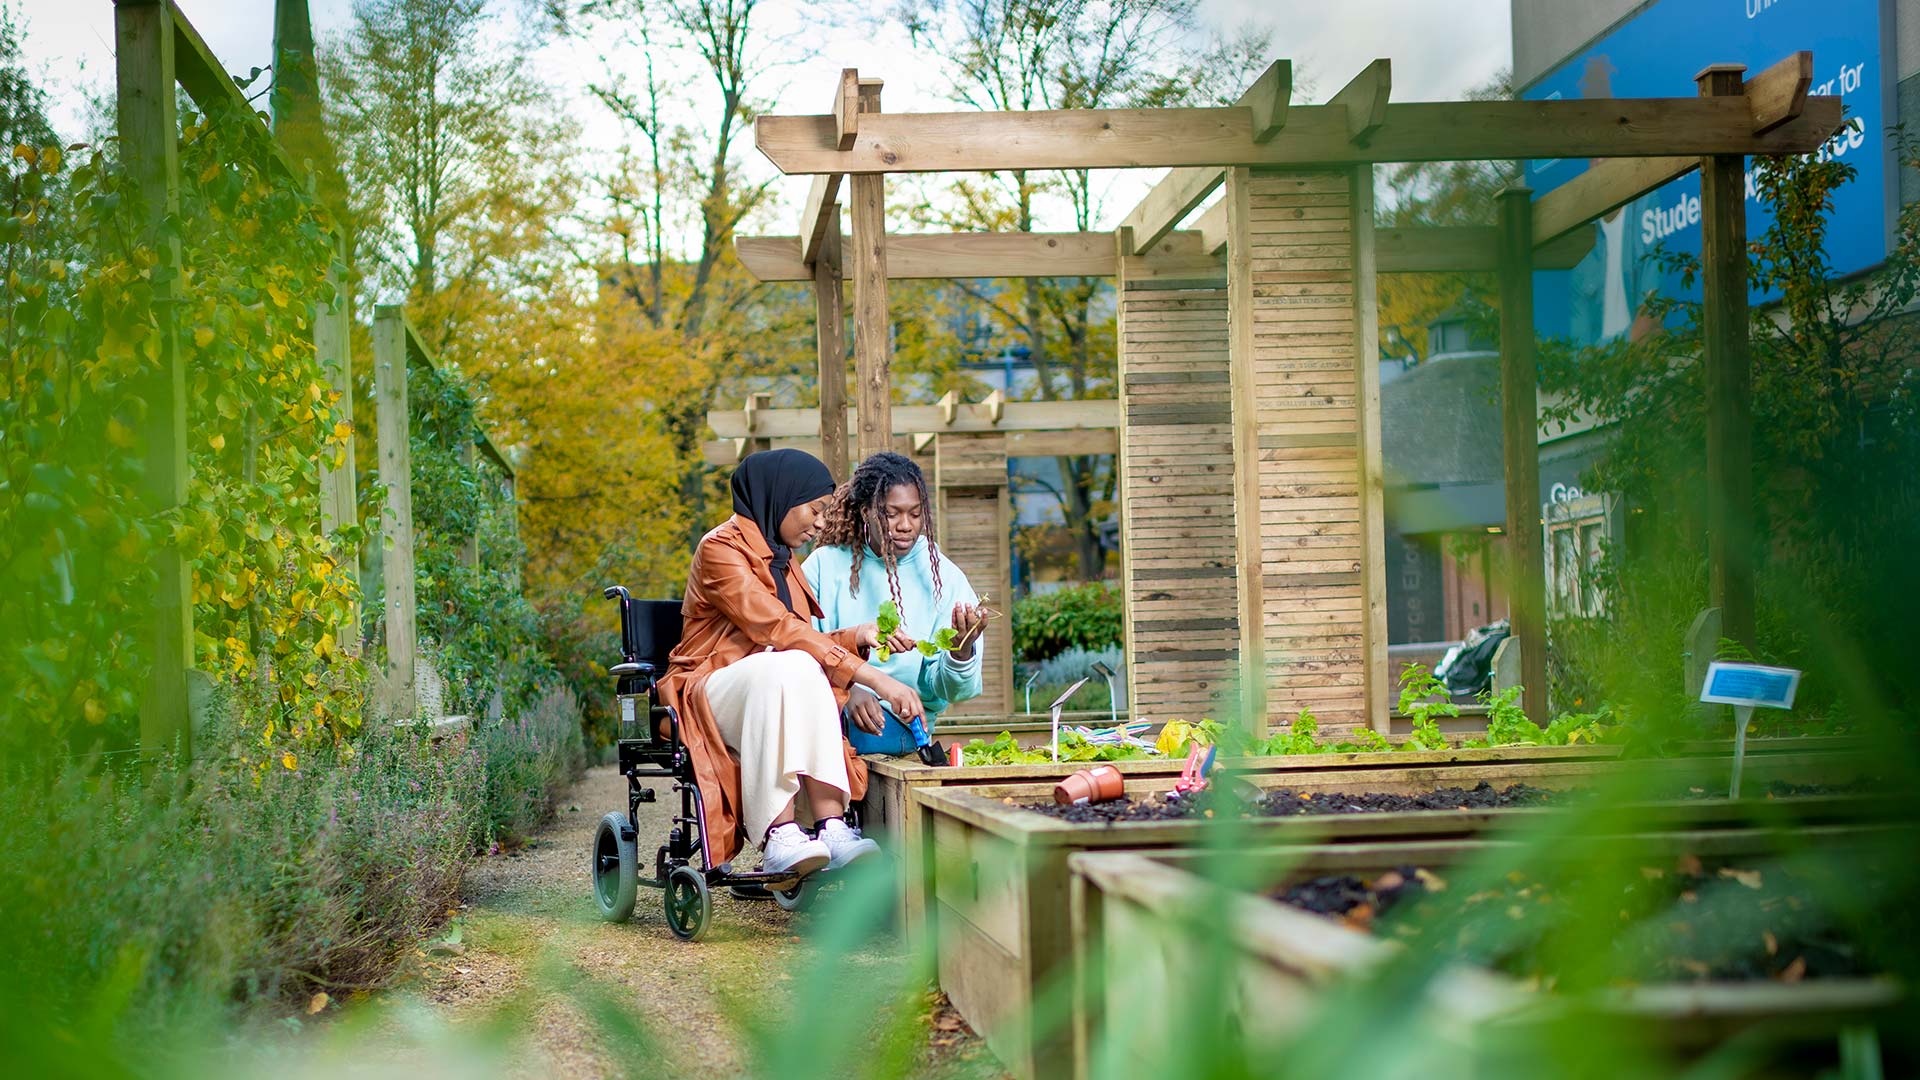 Two students in an allotment, one person in a wheelchair and the other sitting on the wooden frame around the vegetable patches